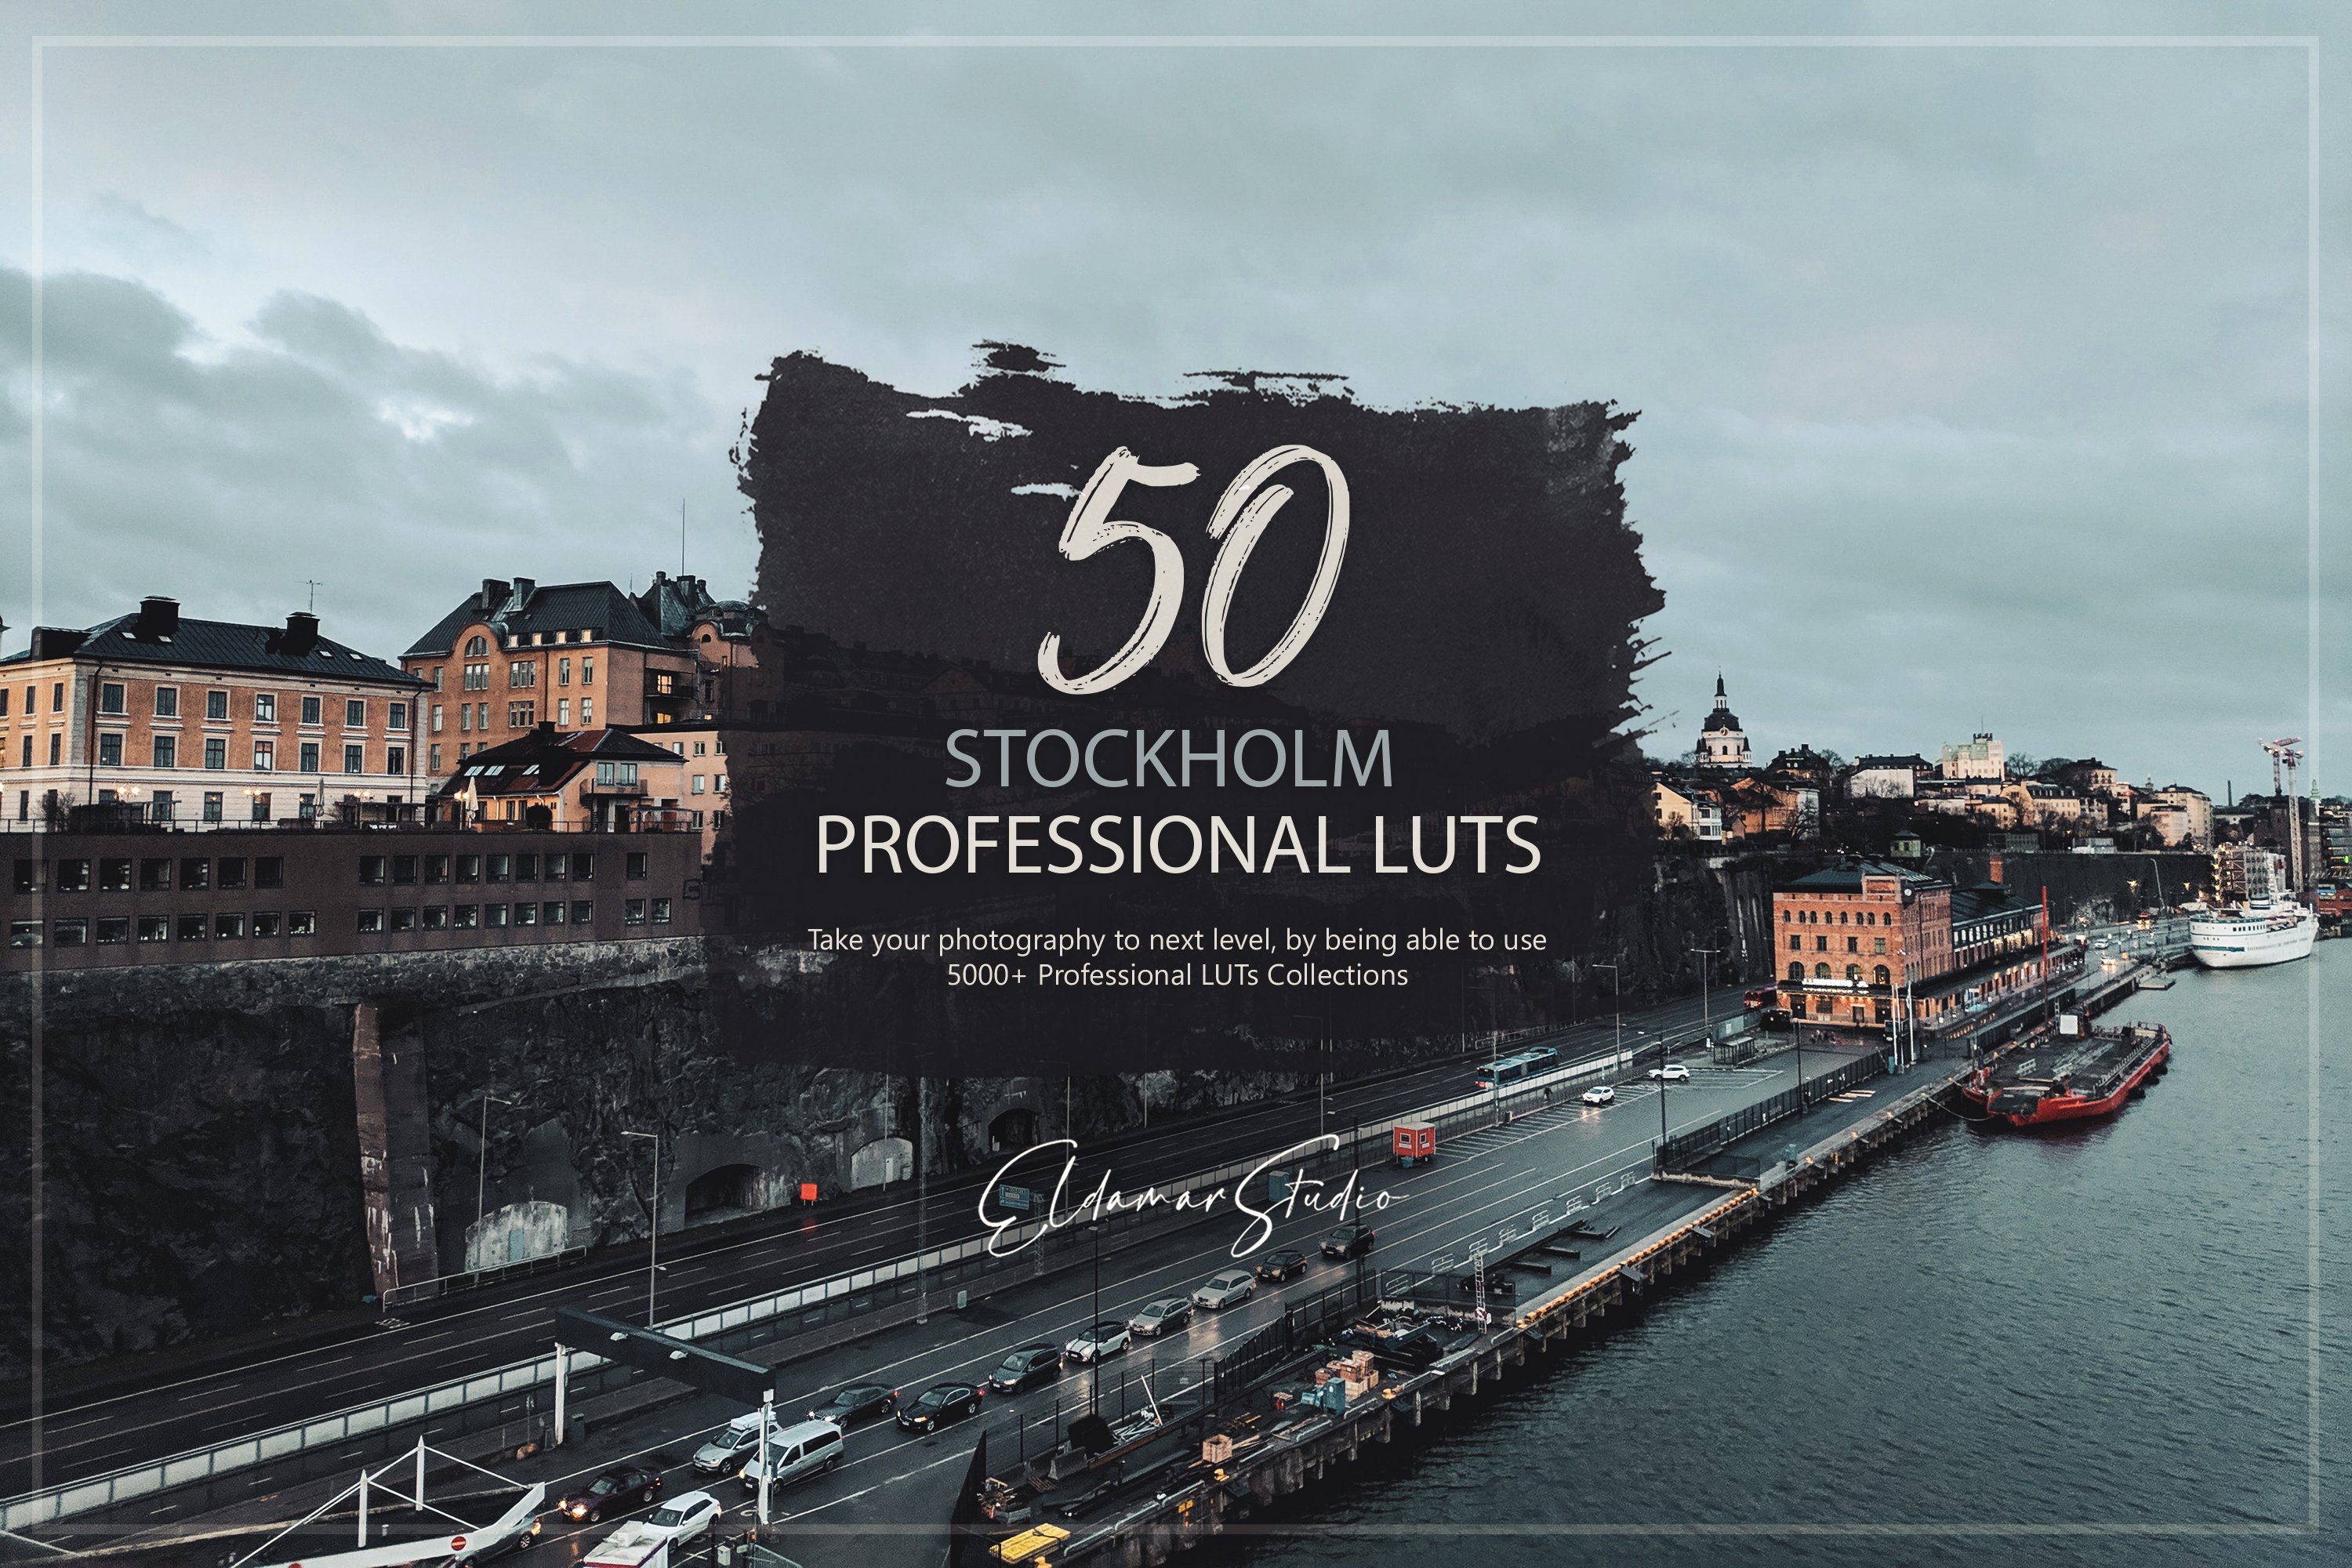 50 Stockholm LUTs Packcover image.